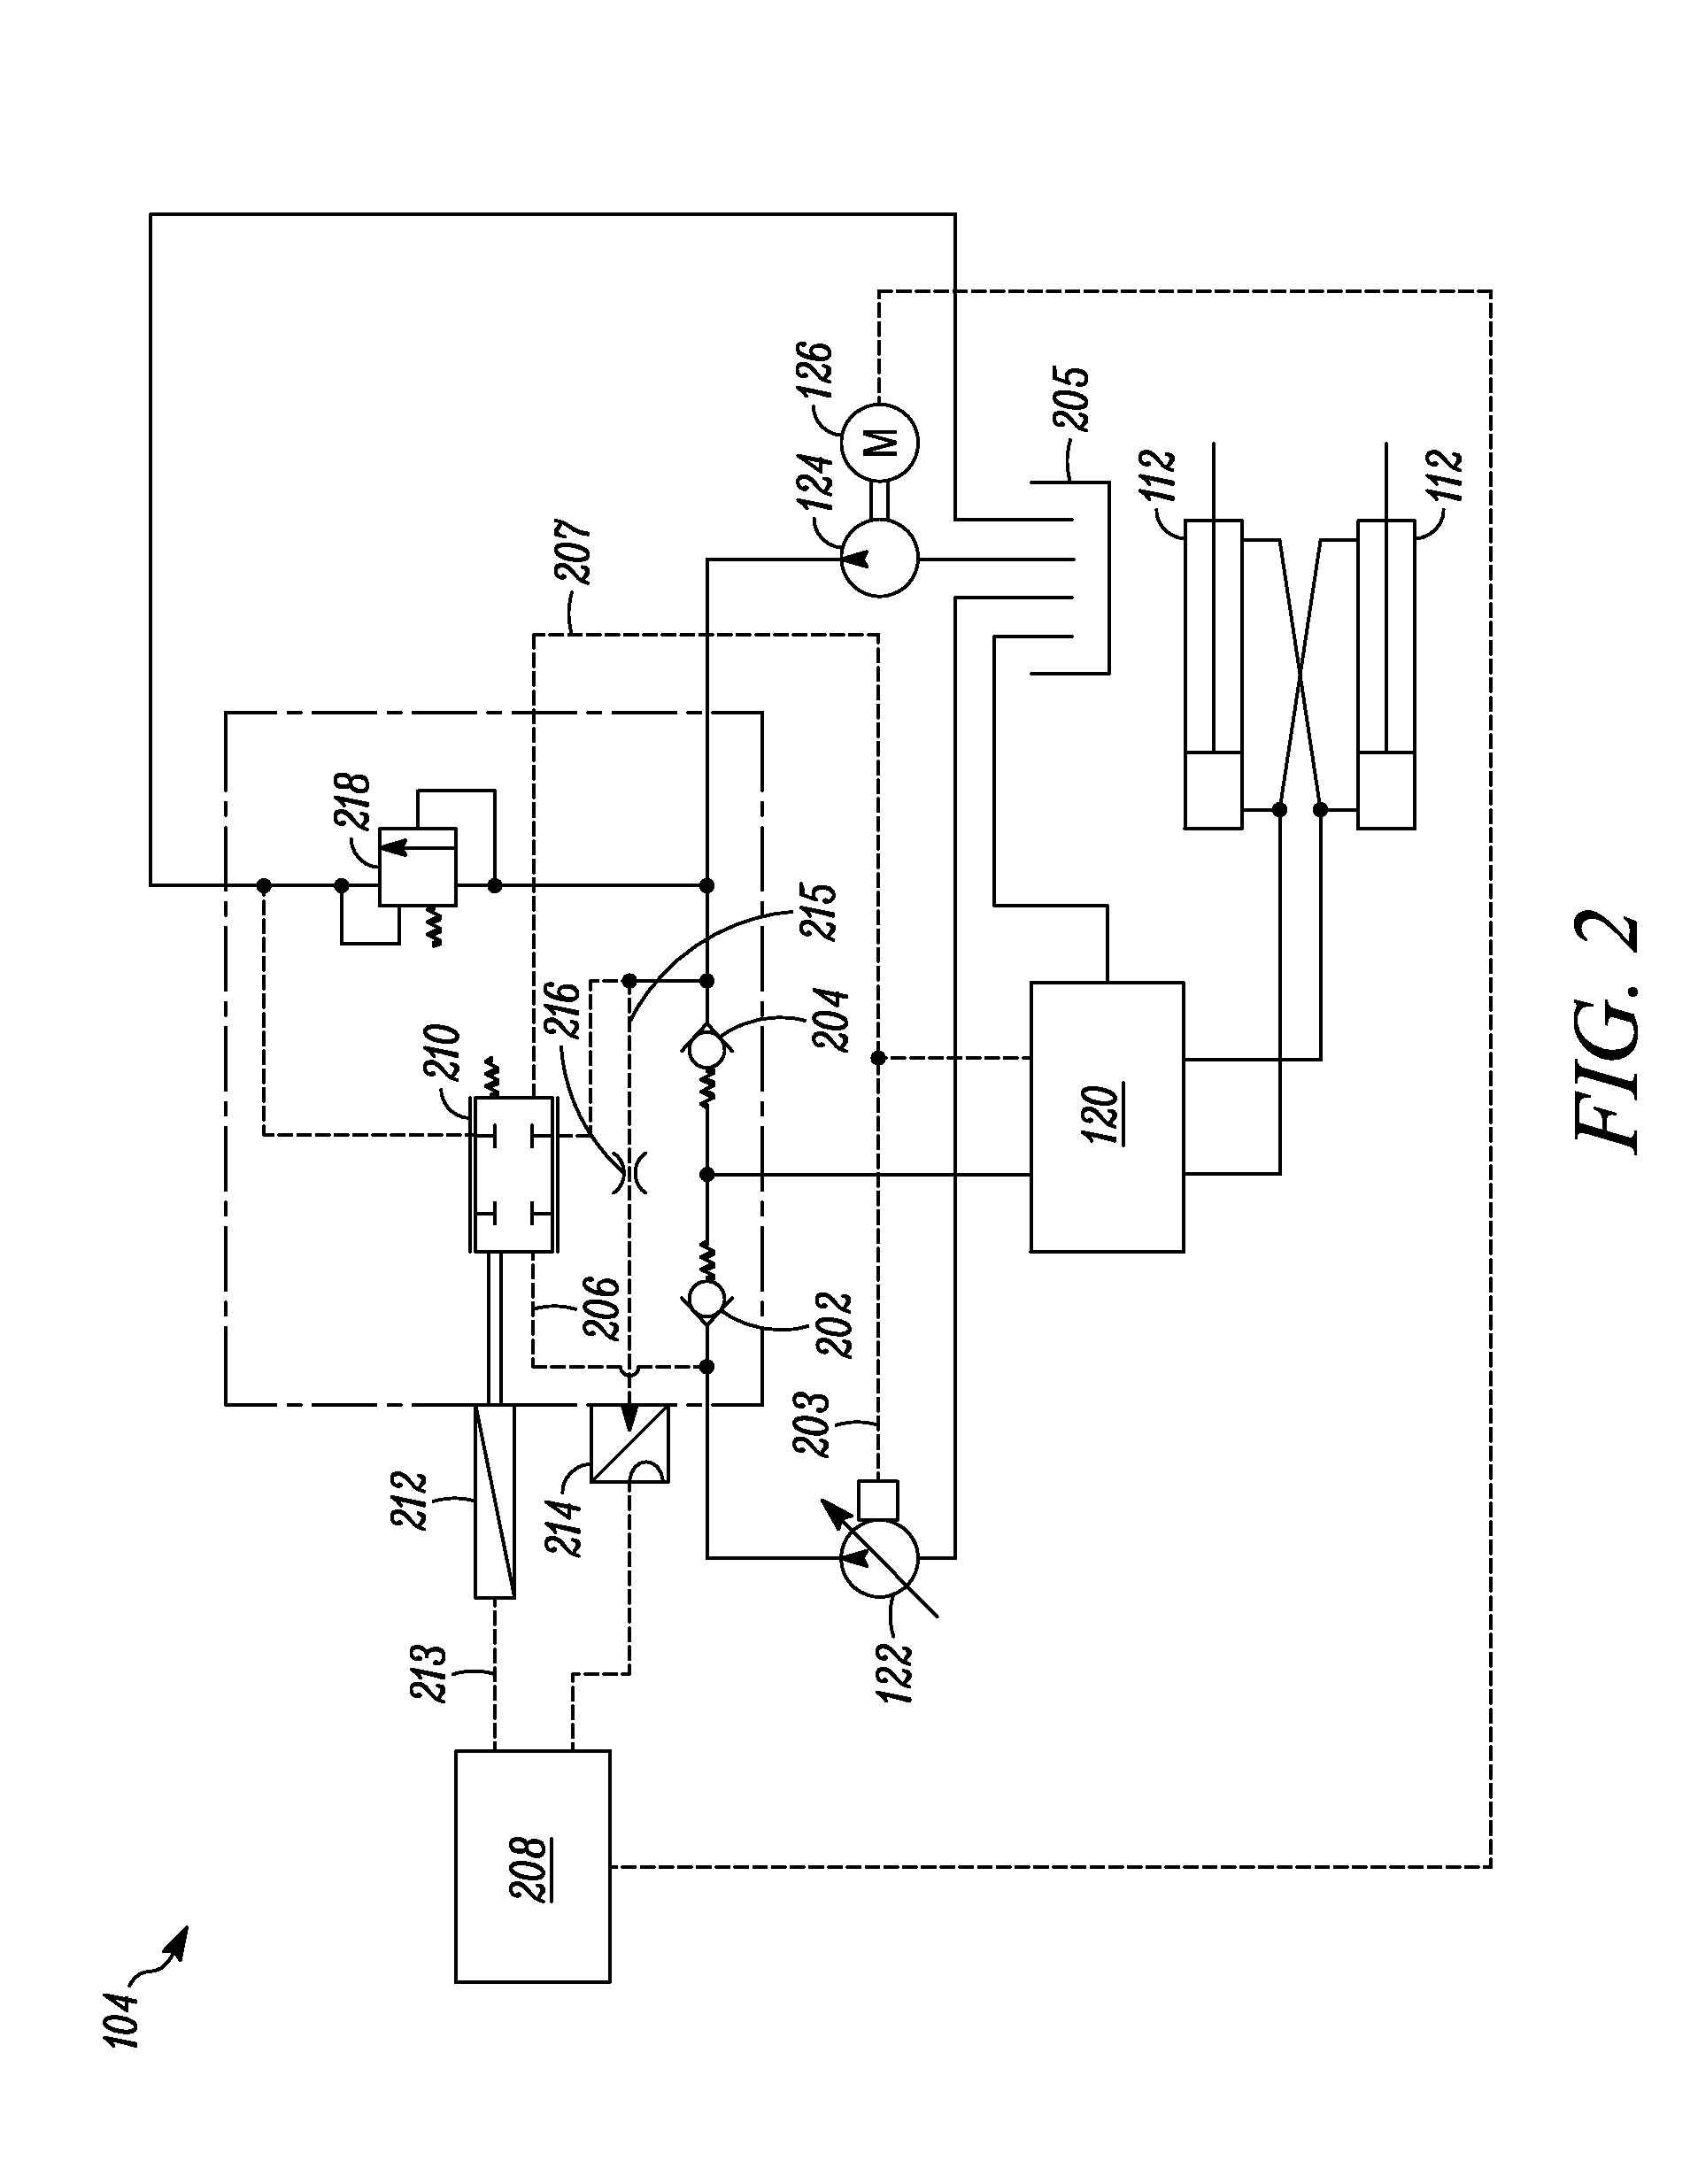 Secondary steering system with margin pressure detection